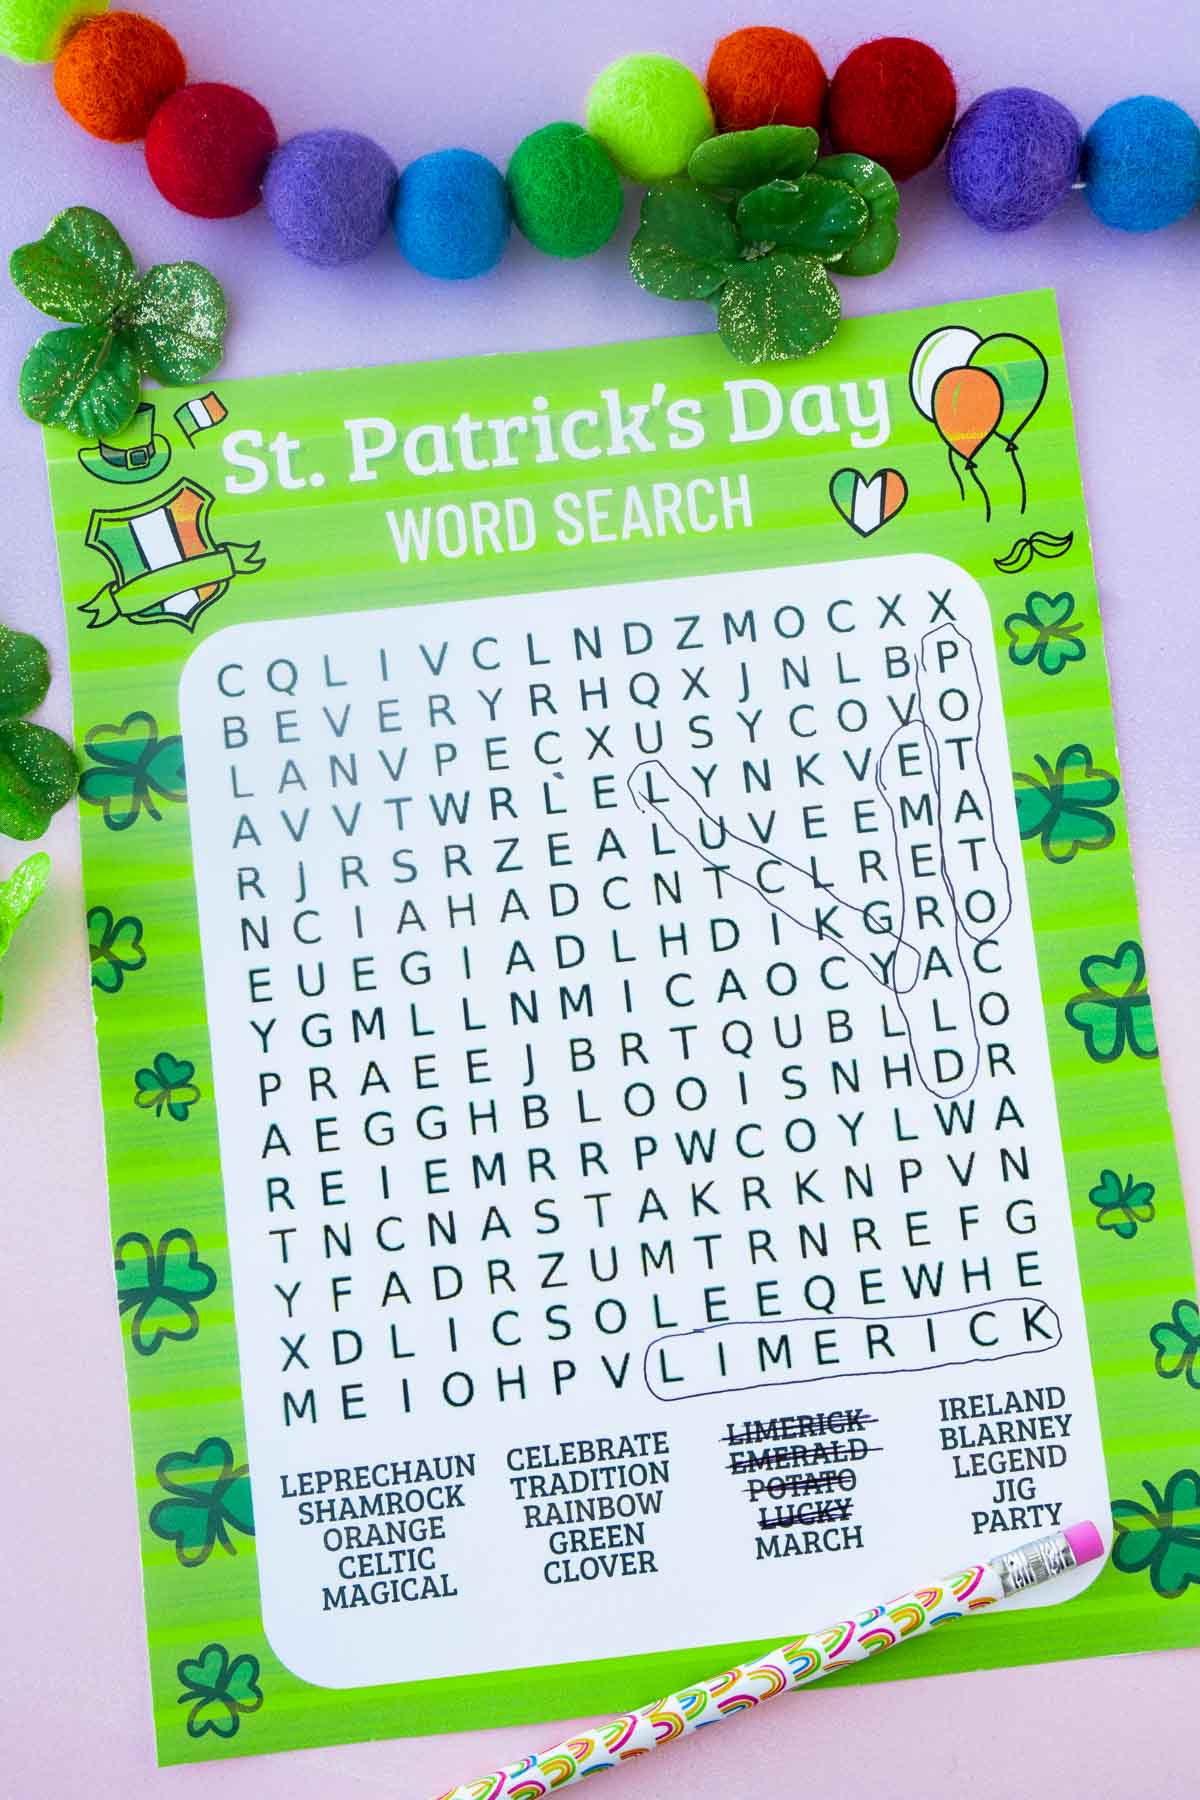 St. Patrick's Day word search with answers circled